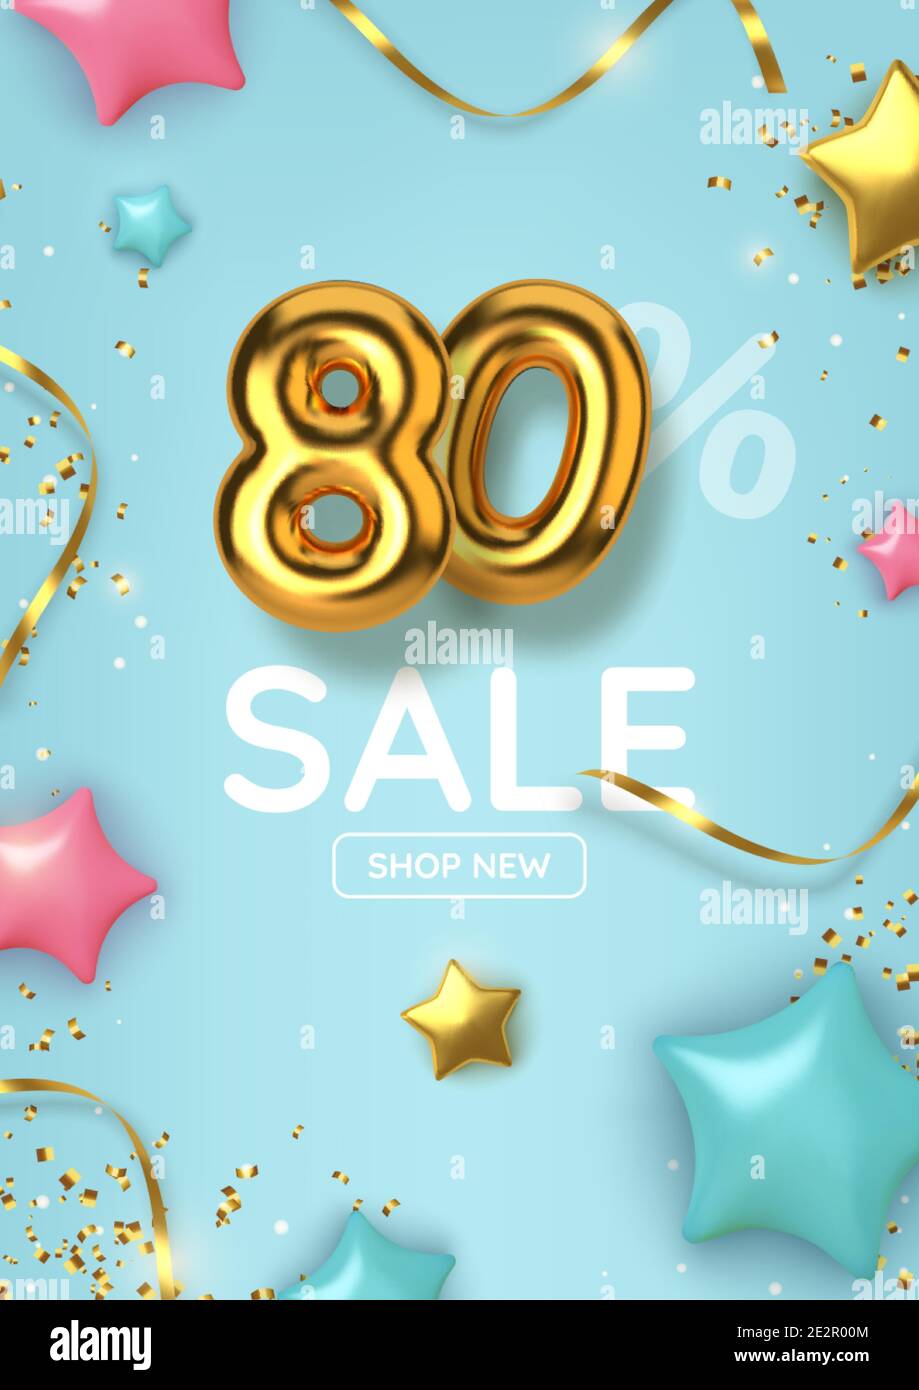 80 off discount promotion sale made of realistic 3d gold balloons with stars, sepantine and tinsel. Number in the form of golden balloons. Vector Stock Vector